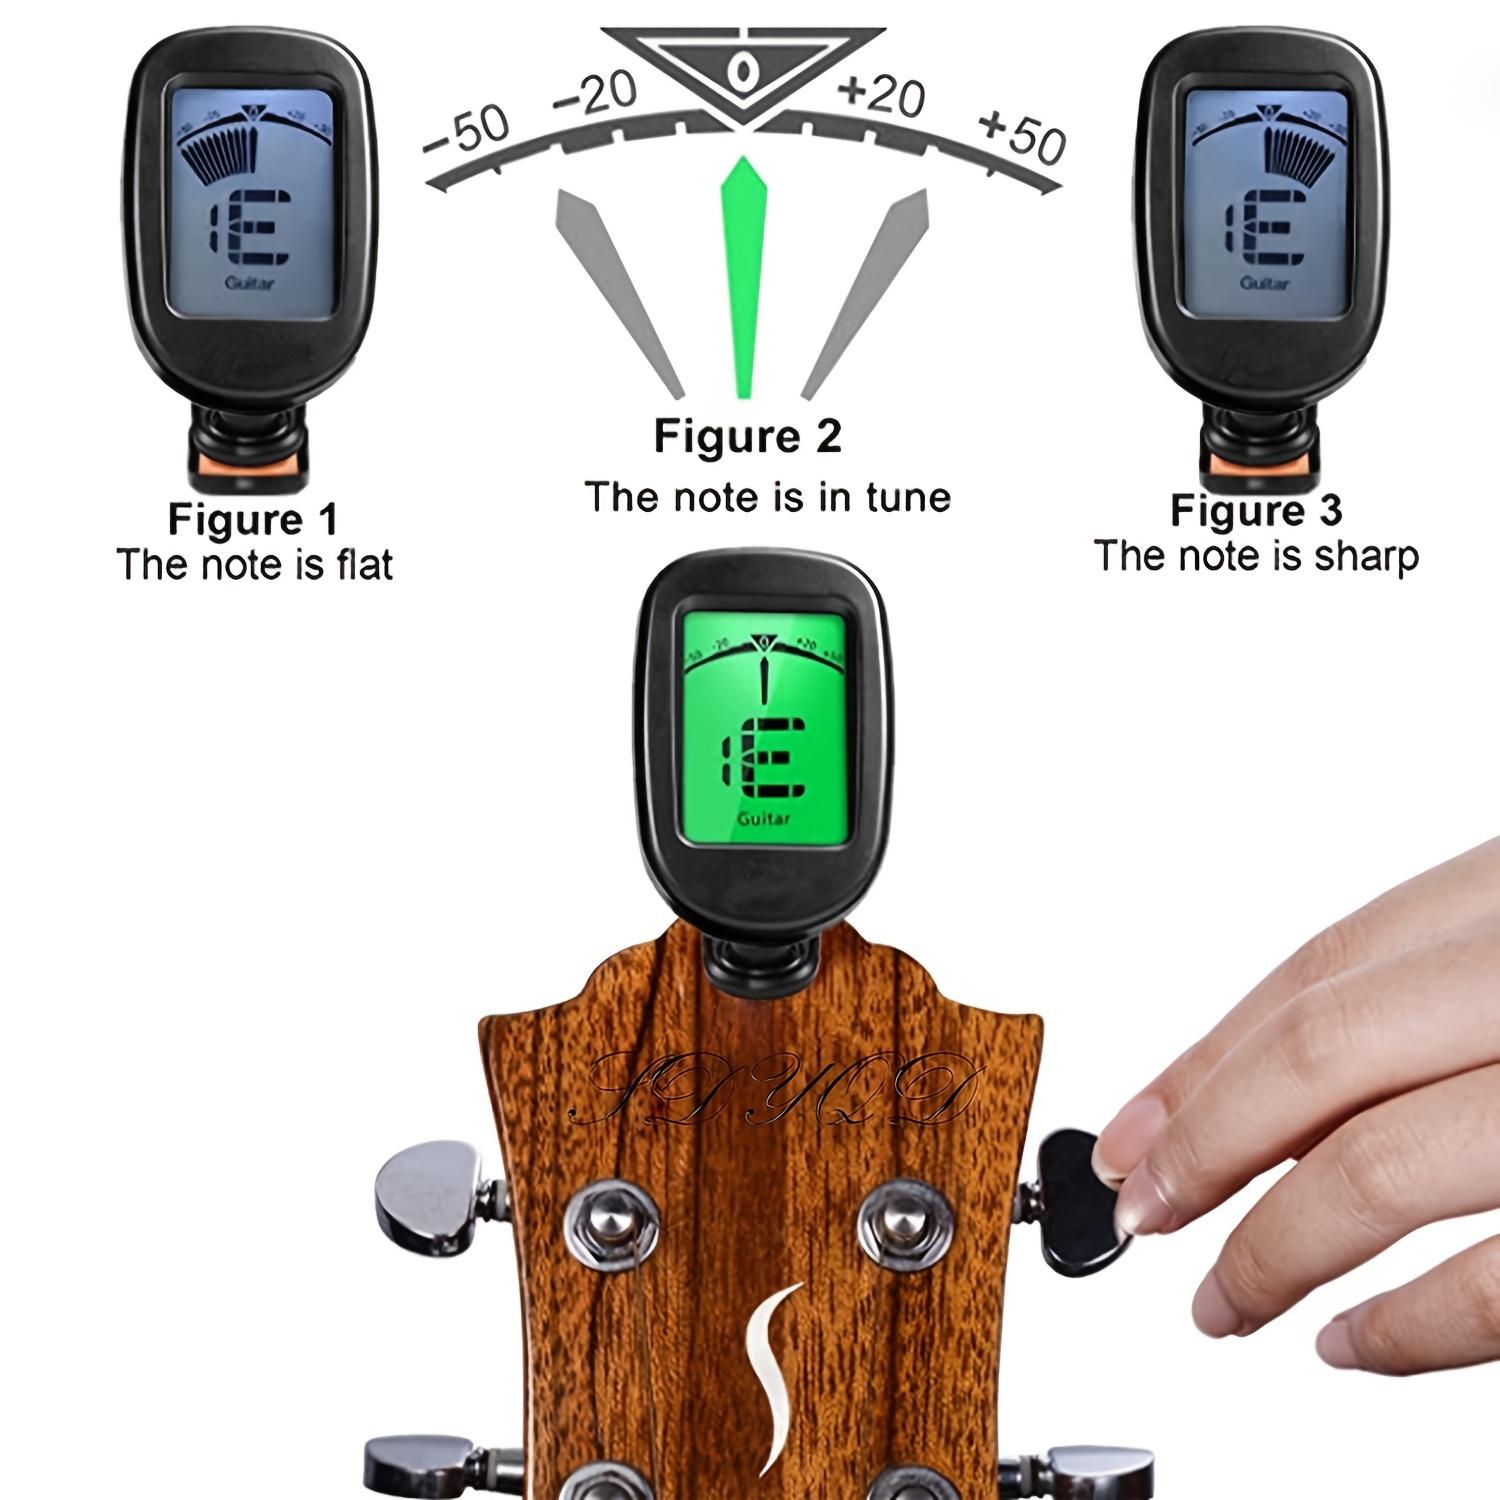 Clip On Guitar Tuner 2 Pack For All Instruments, Acoustic/Electric Guitar,  Ukulele, Bass, Violin, Banjo, Large Clear Lcd Display For Guitar Tuner,  Chromatic Tuner, 8 Pack Guitar Picks Included